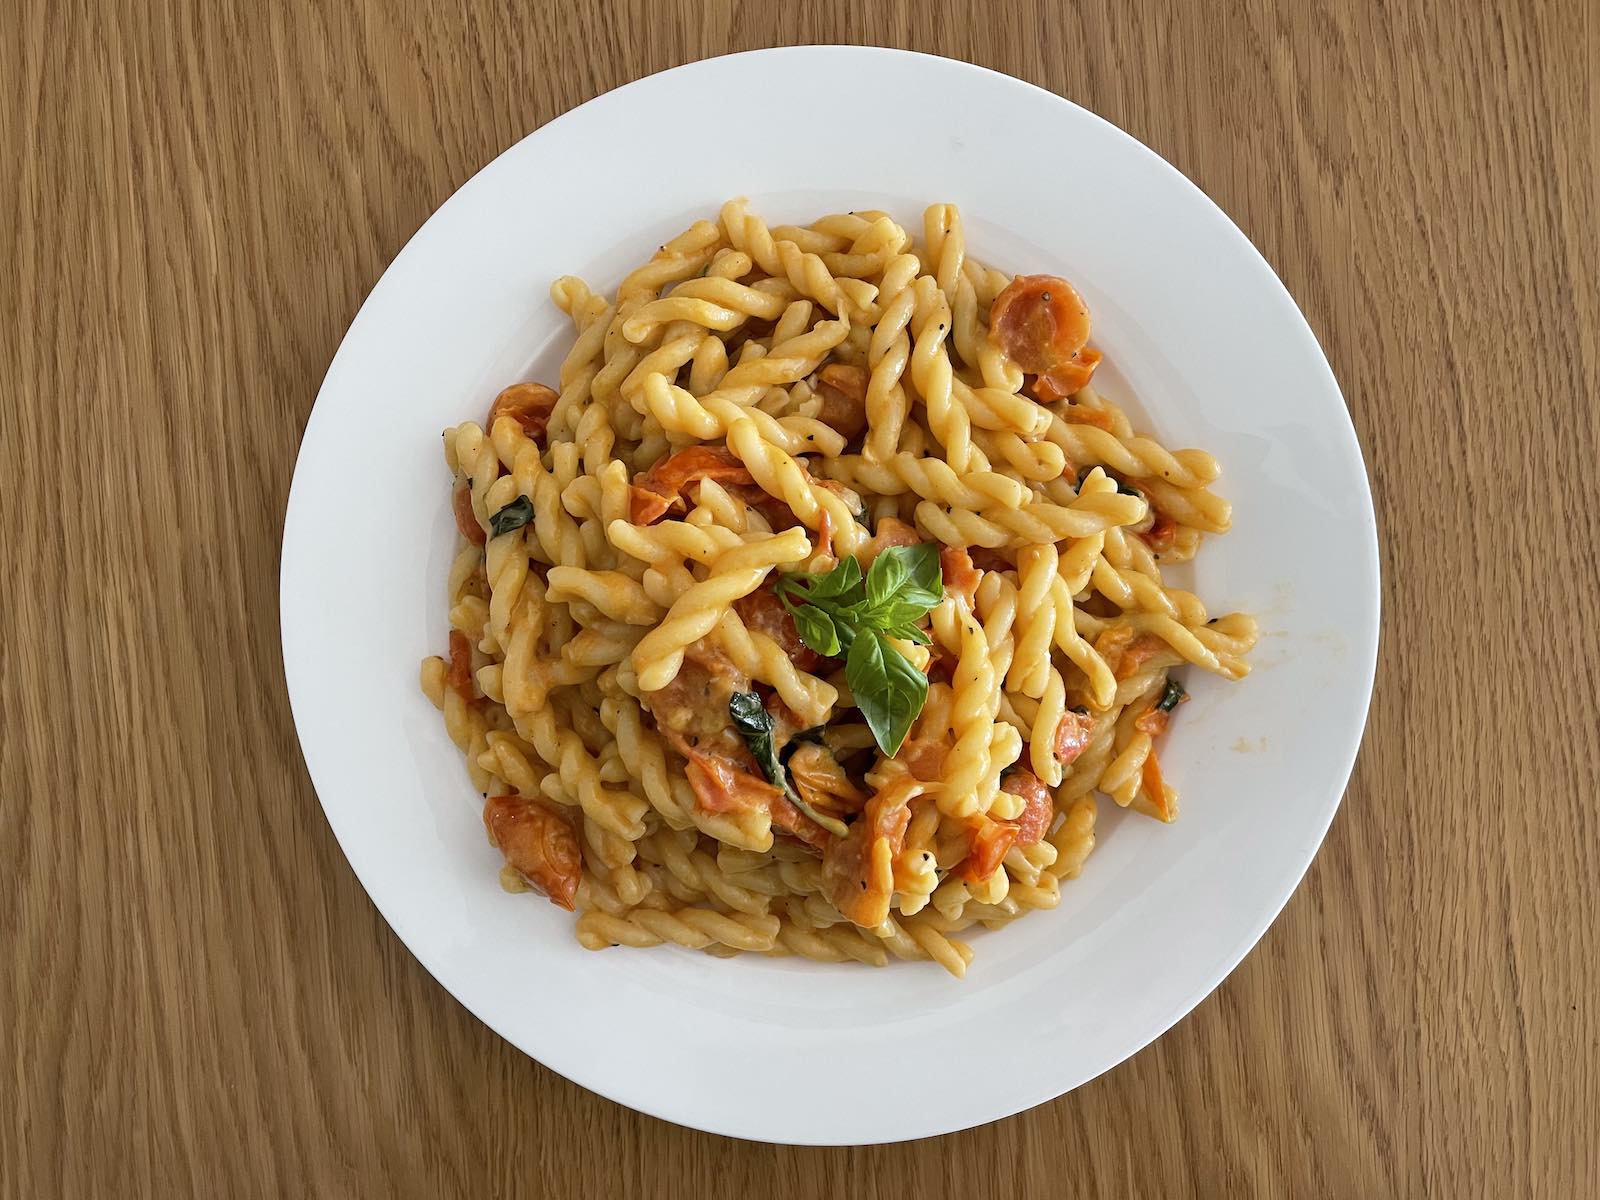 A white plate of curly pasta on a wooden table. The pasta is cooked with cherry tomatoes, basil, and has a slightly creamy texture.